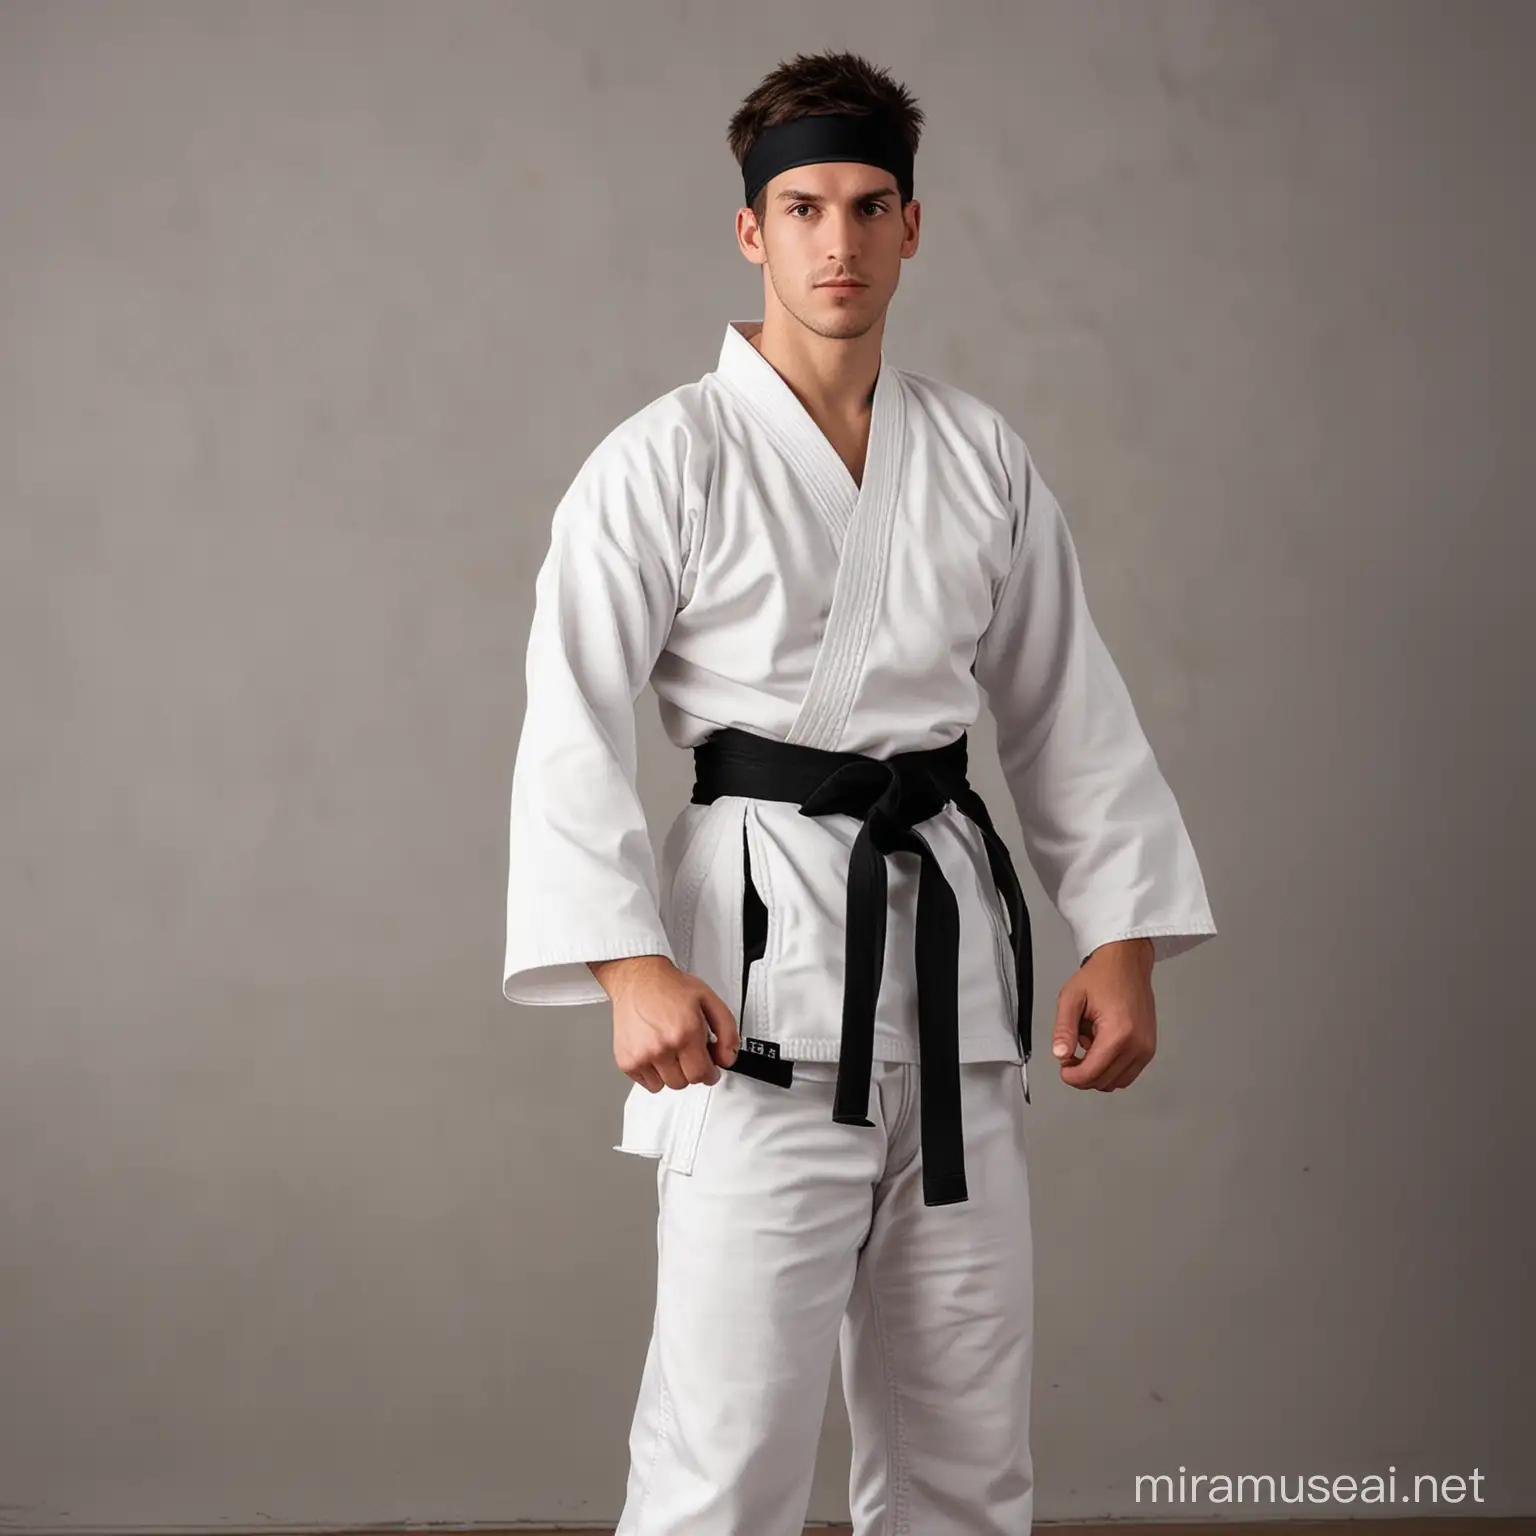 karate uniform with a headband and a black belt in karate studio environment with male person